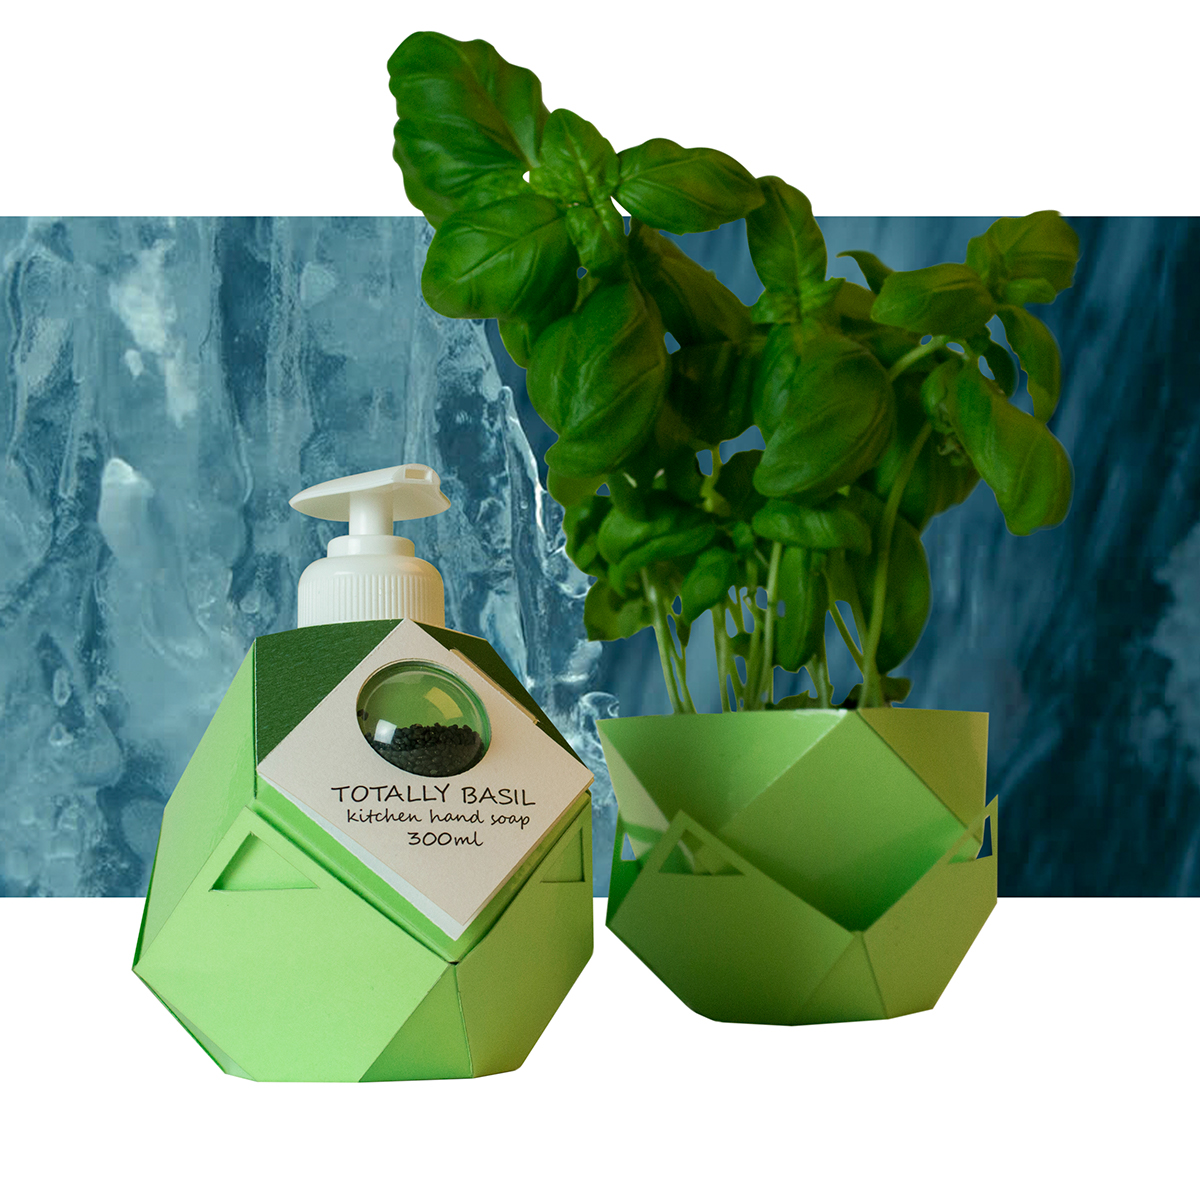 starpack grow ecological Nature soap Liquid container hand shampoo Inspired by Nature Basil plant pot liquid dispenser biomimicry